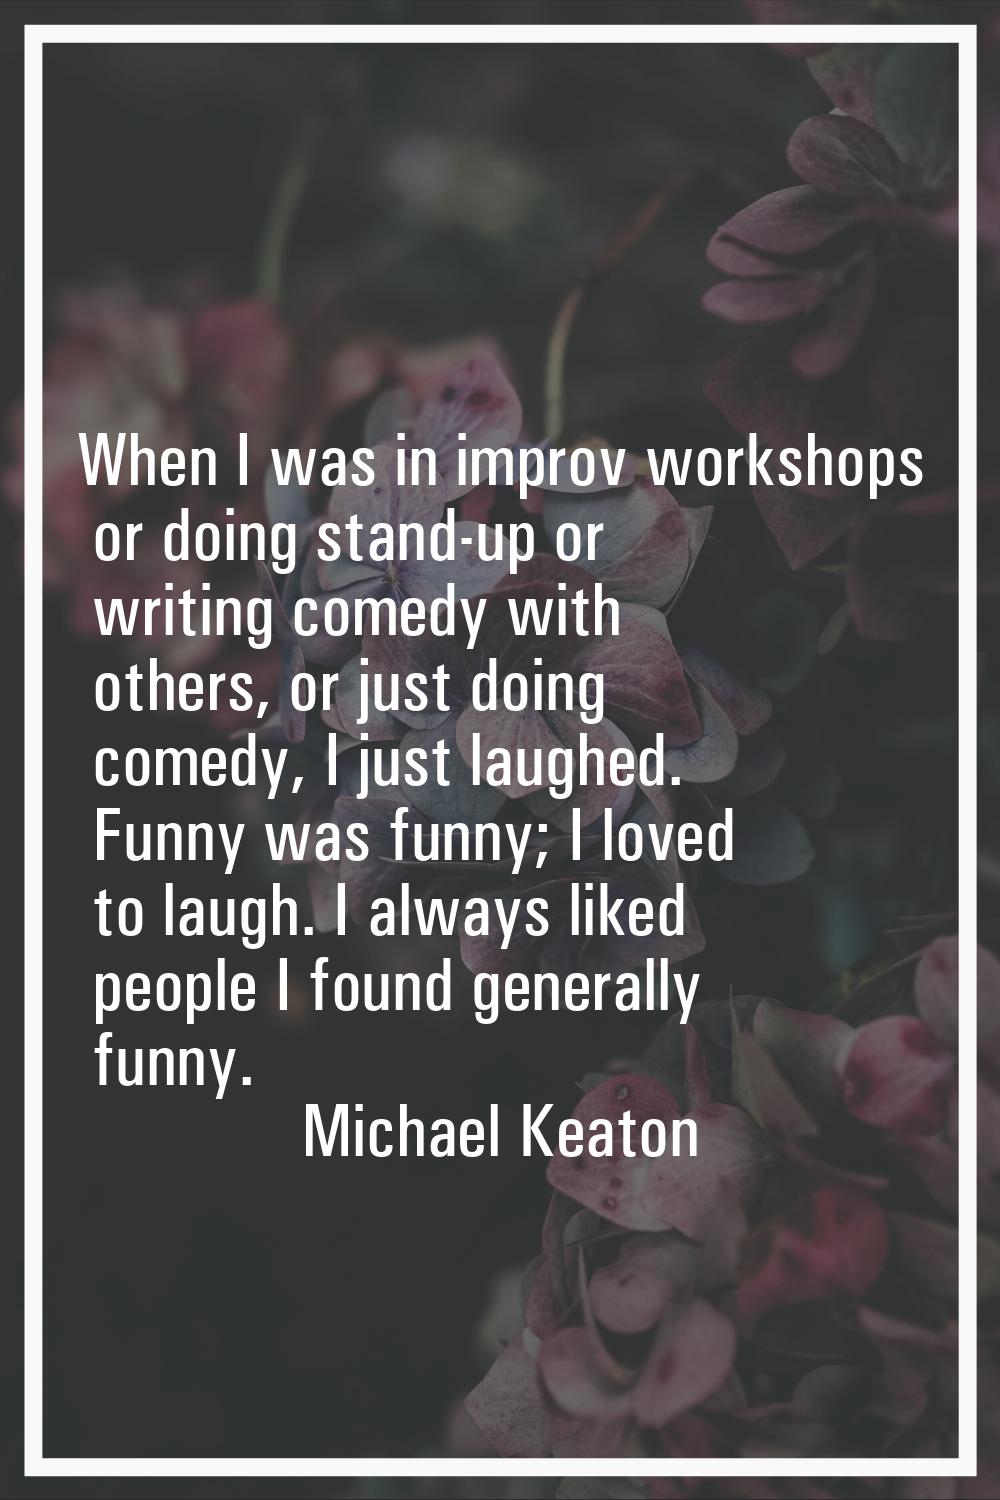 When I was in improv workshops or doing stand-up or writing comedy with others, or just doing comed